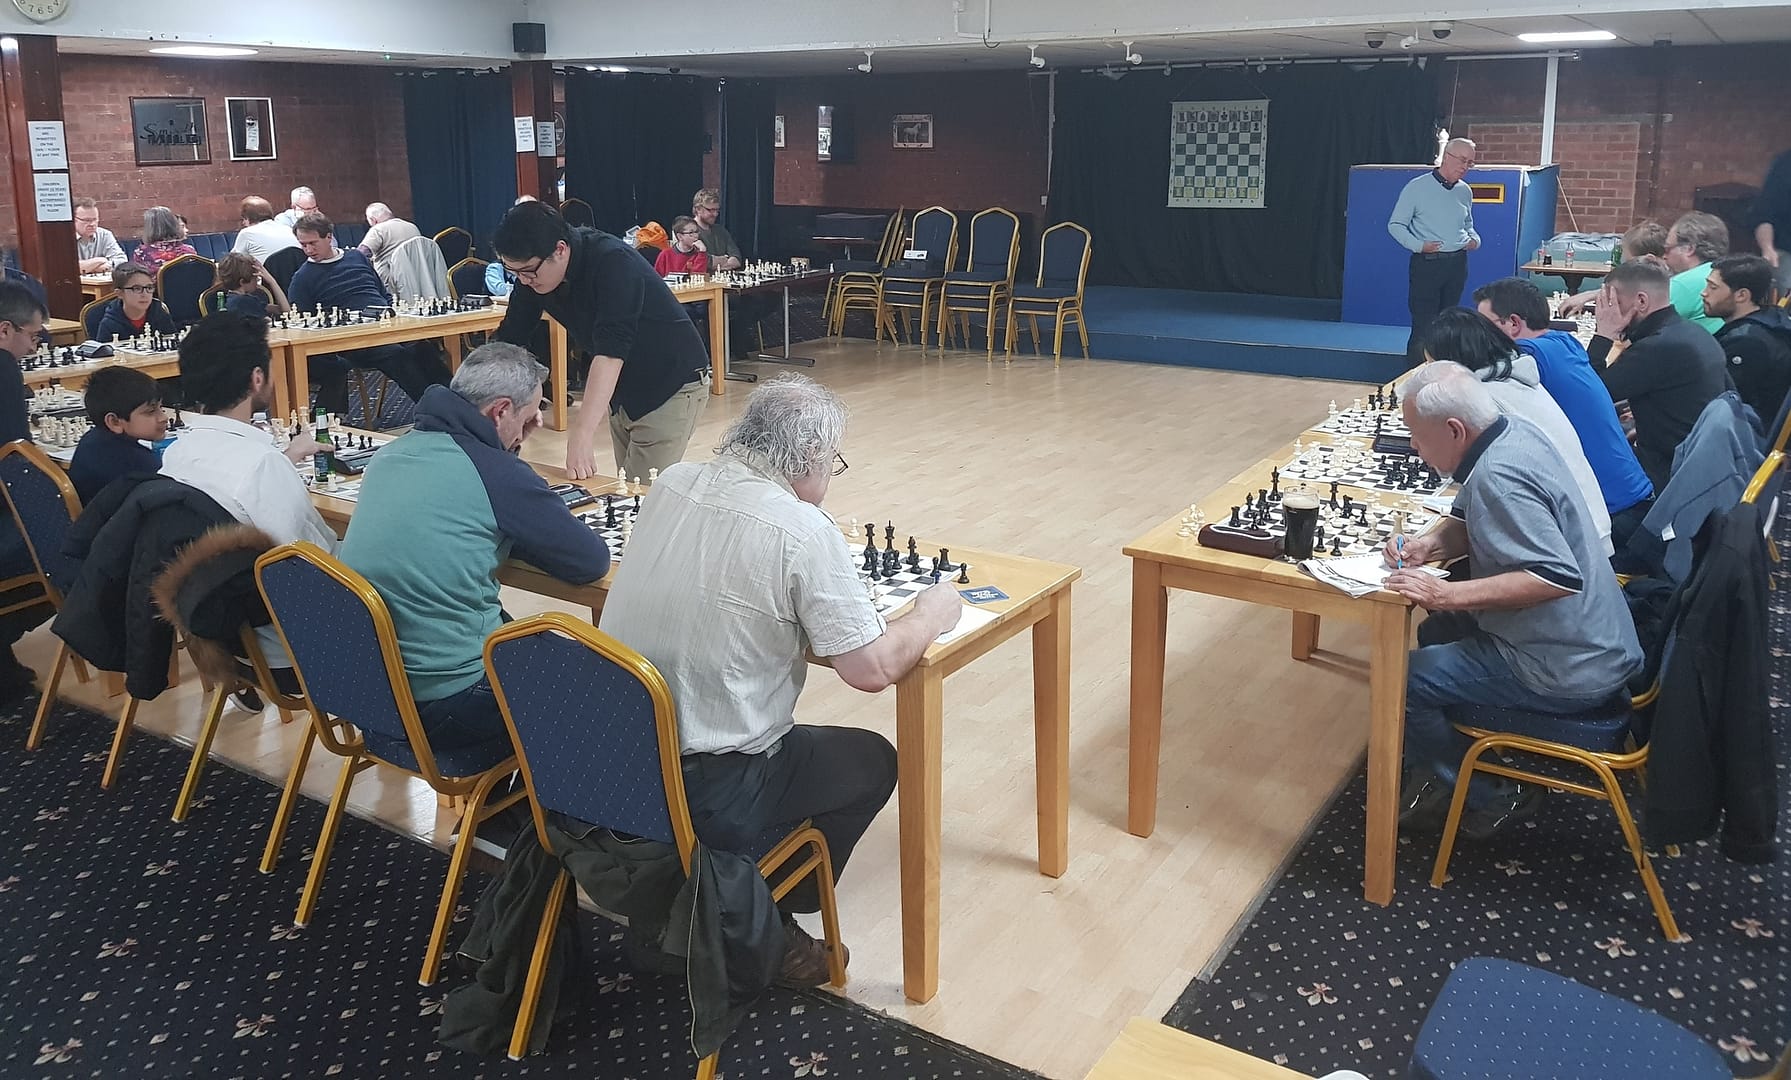 The David Howell simul, and the Grand Prix to the left